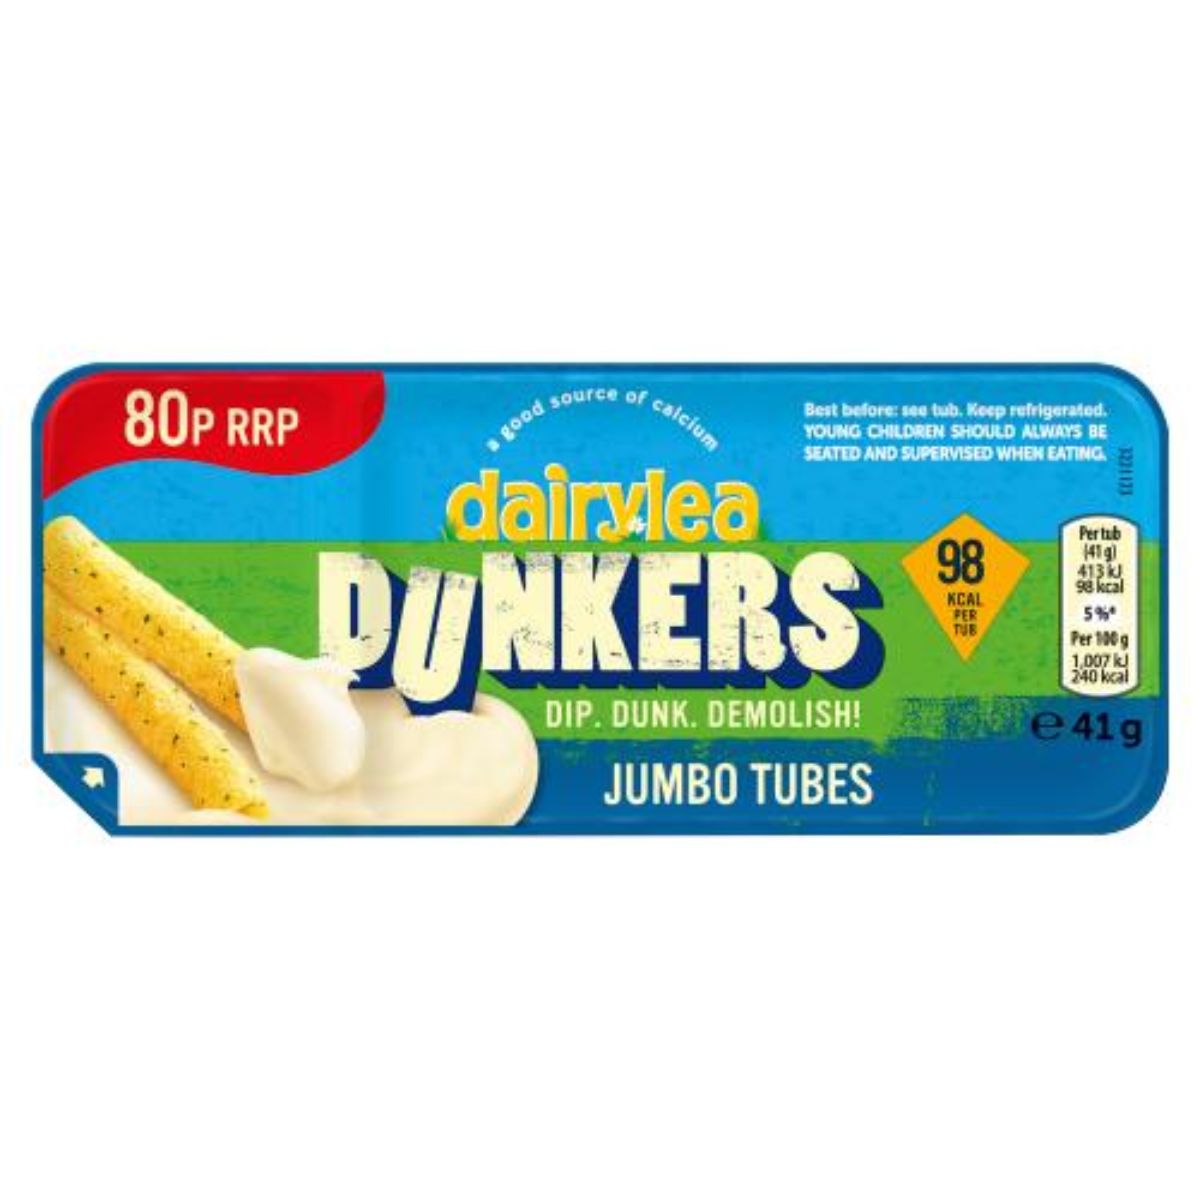 A tin of Dairylea - Dunkers Jumbo Tubes - 41g on a white background.